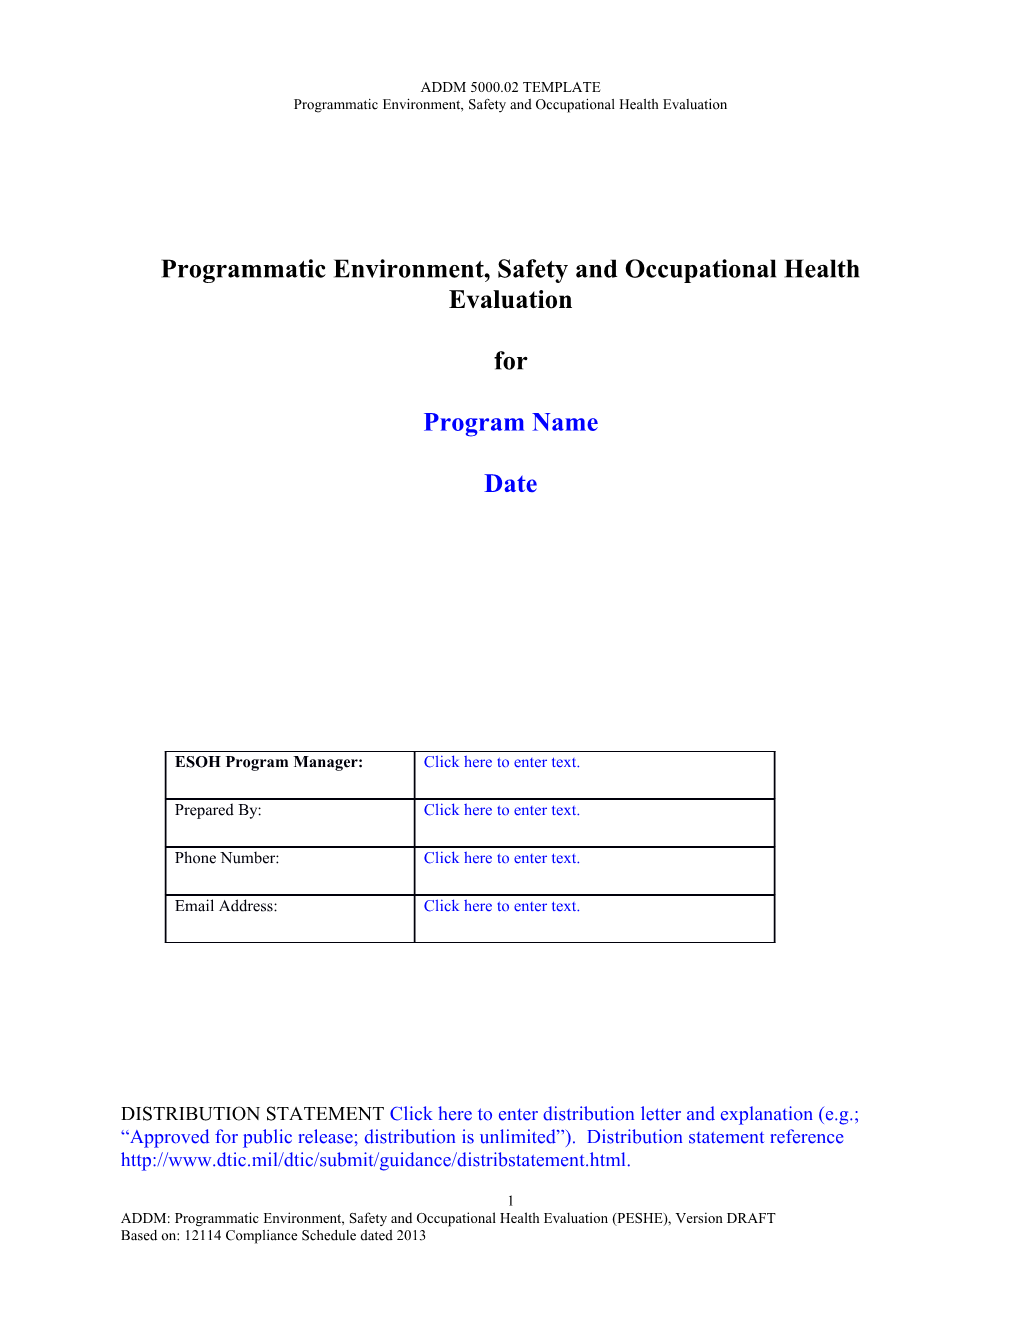 Programmatic Environment, Safety and Occupational Health Evaluation PESHE ADDM Template DRAFT